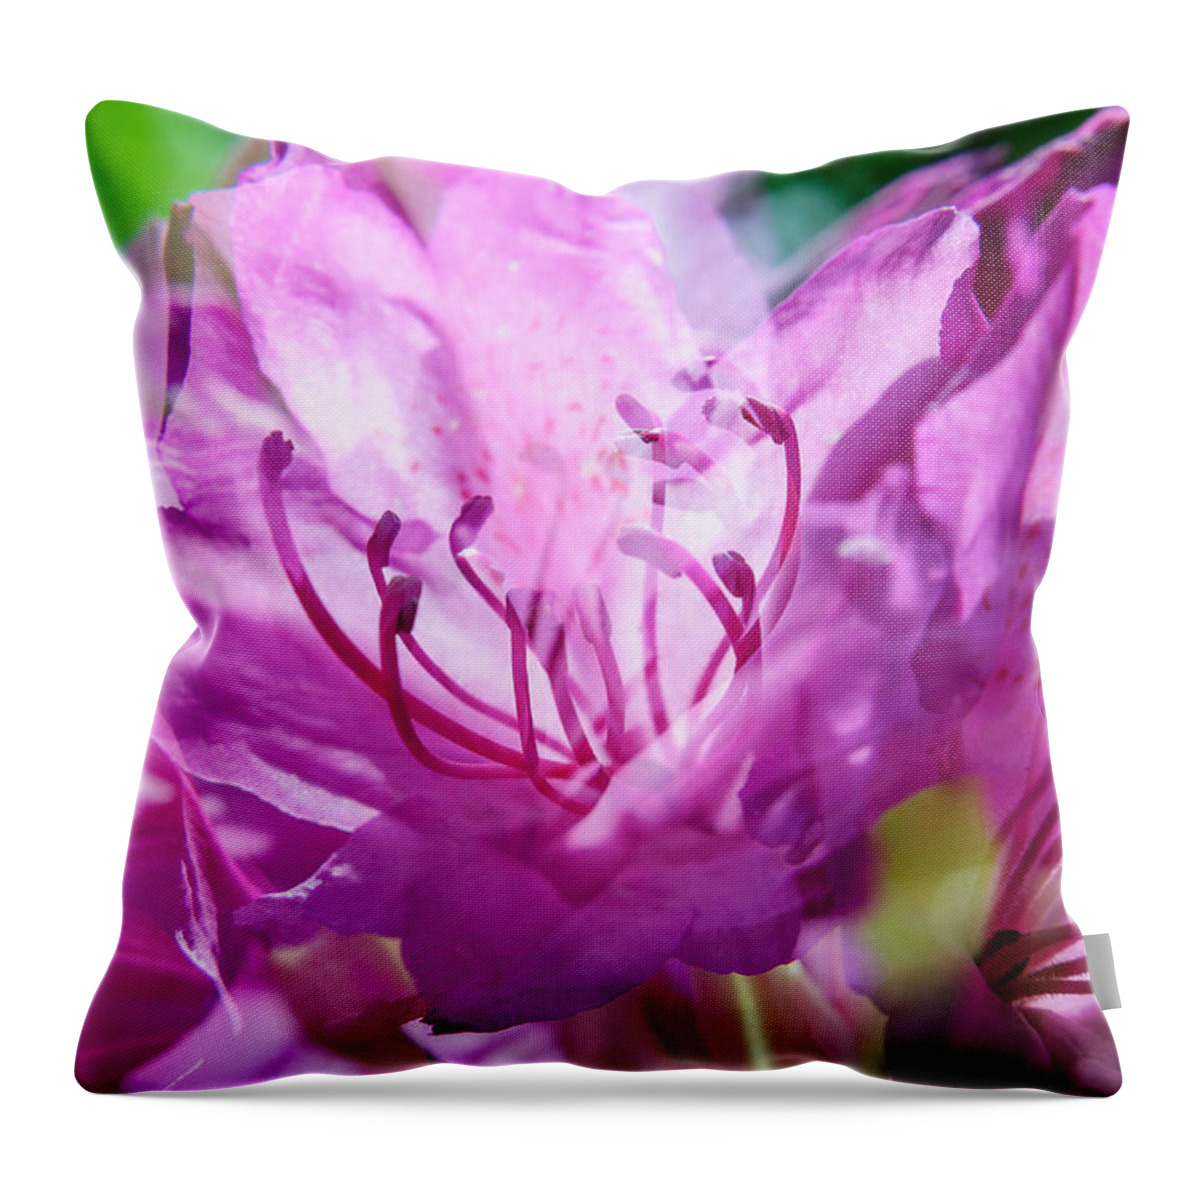 Abstract Throw Pillow featuring the photograph Double Magenta Rhododendron by Marcus Karlsson Sall